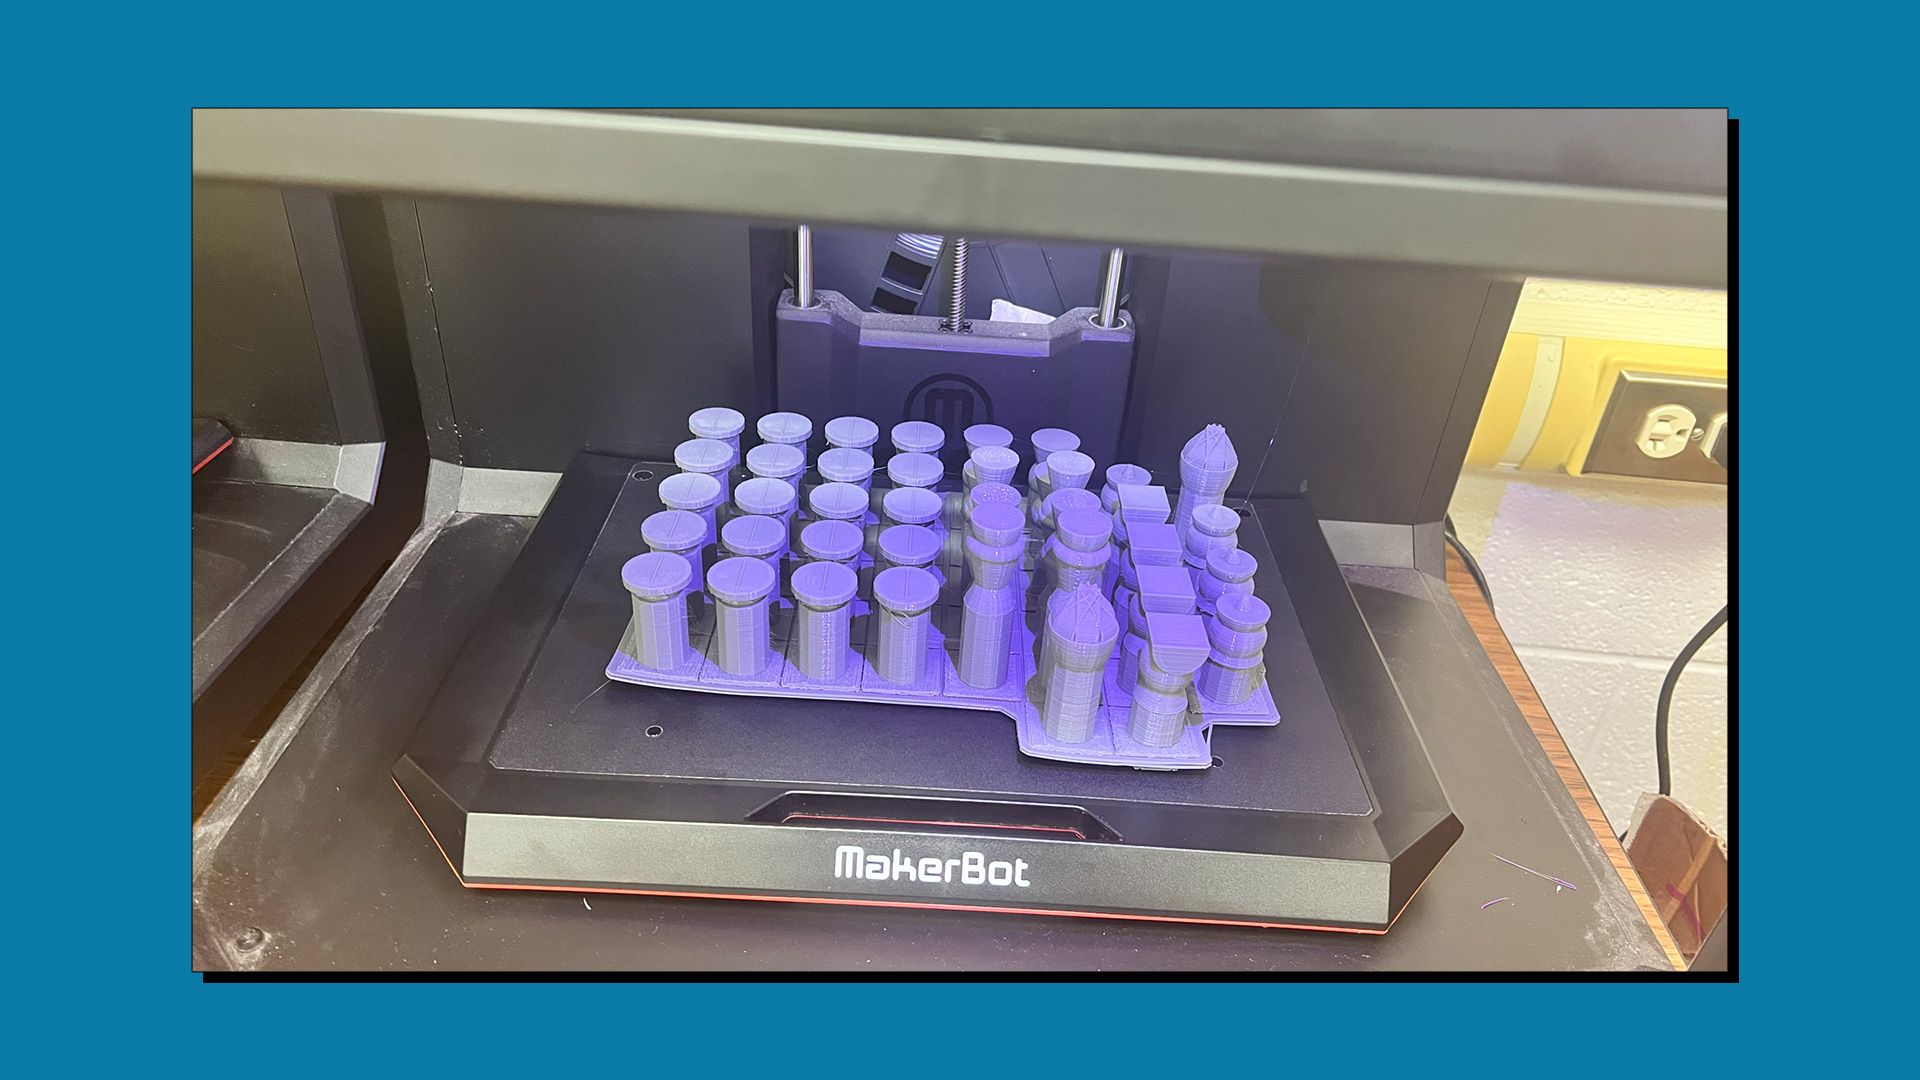 A set of 3D printed board game pieces on a MakerBot 3D printer.